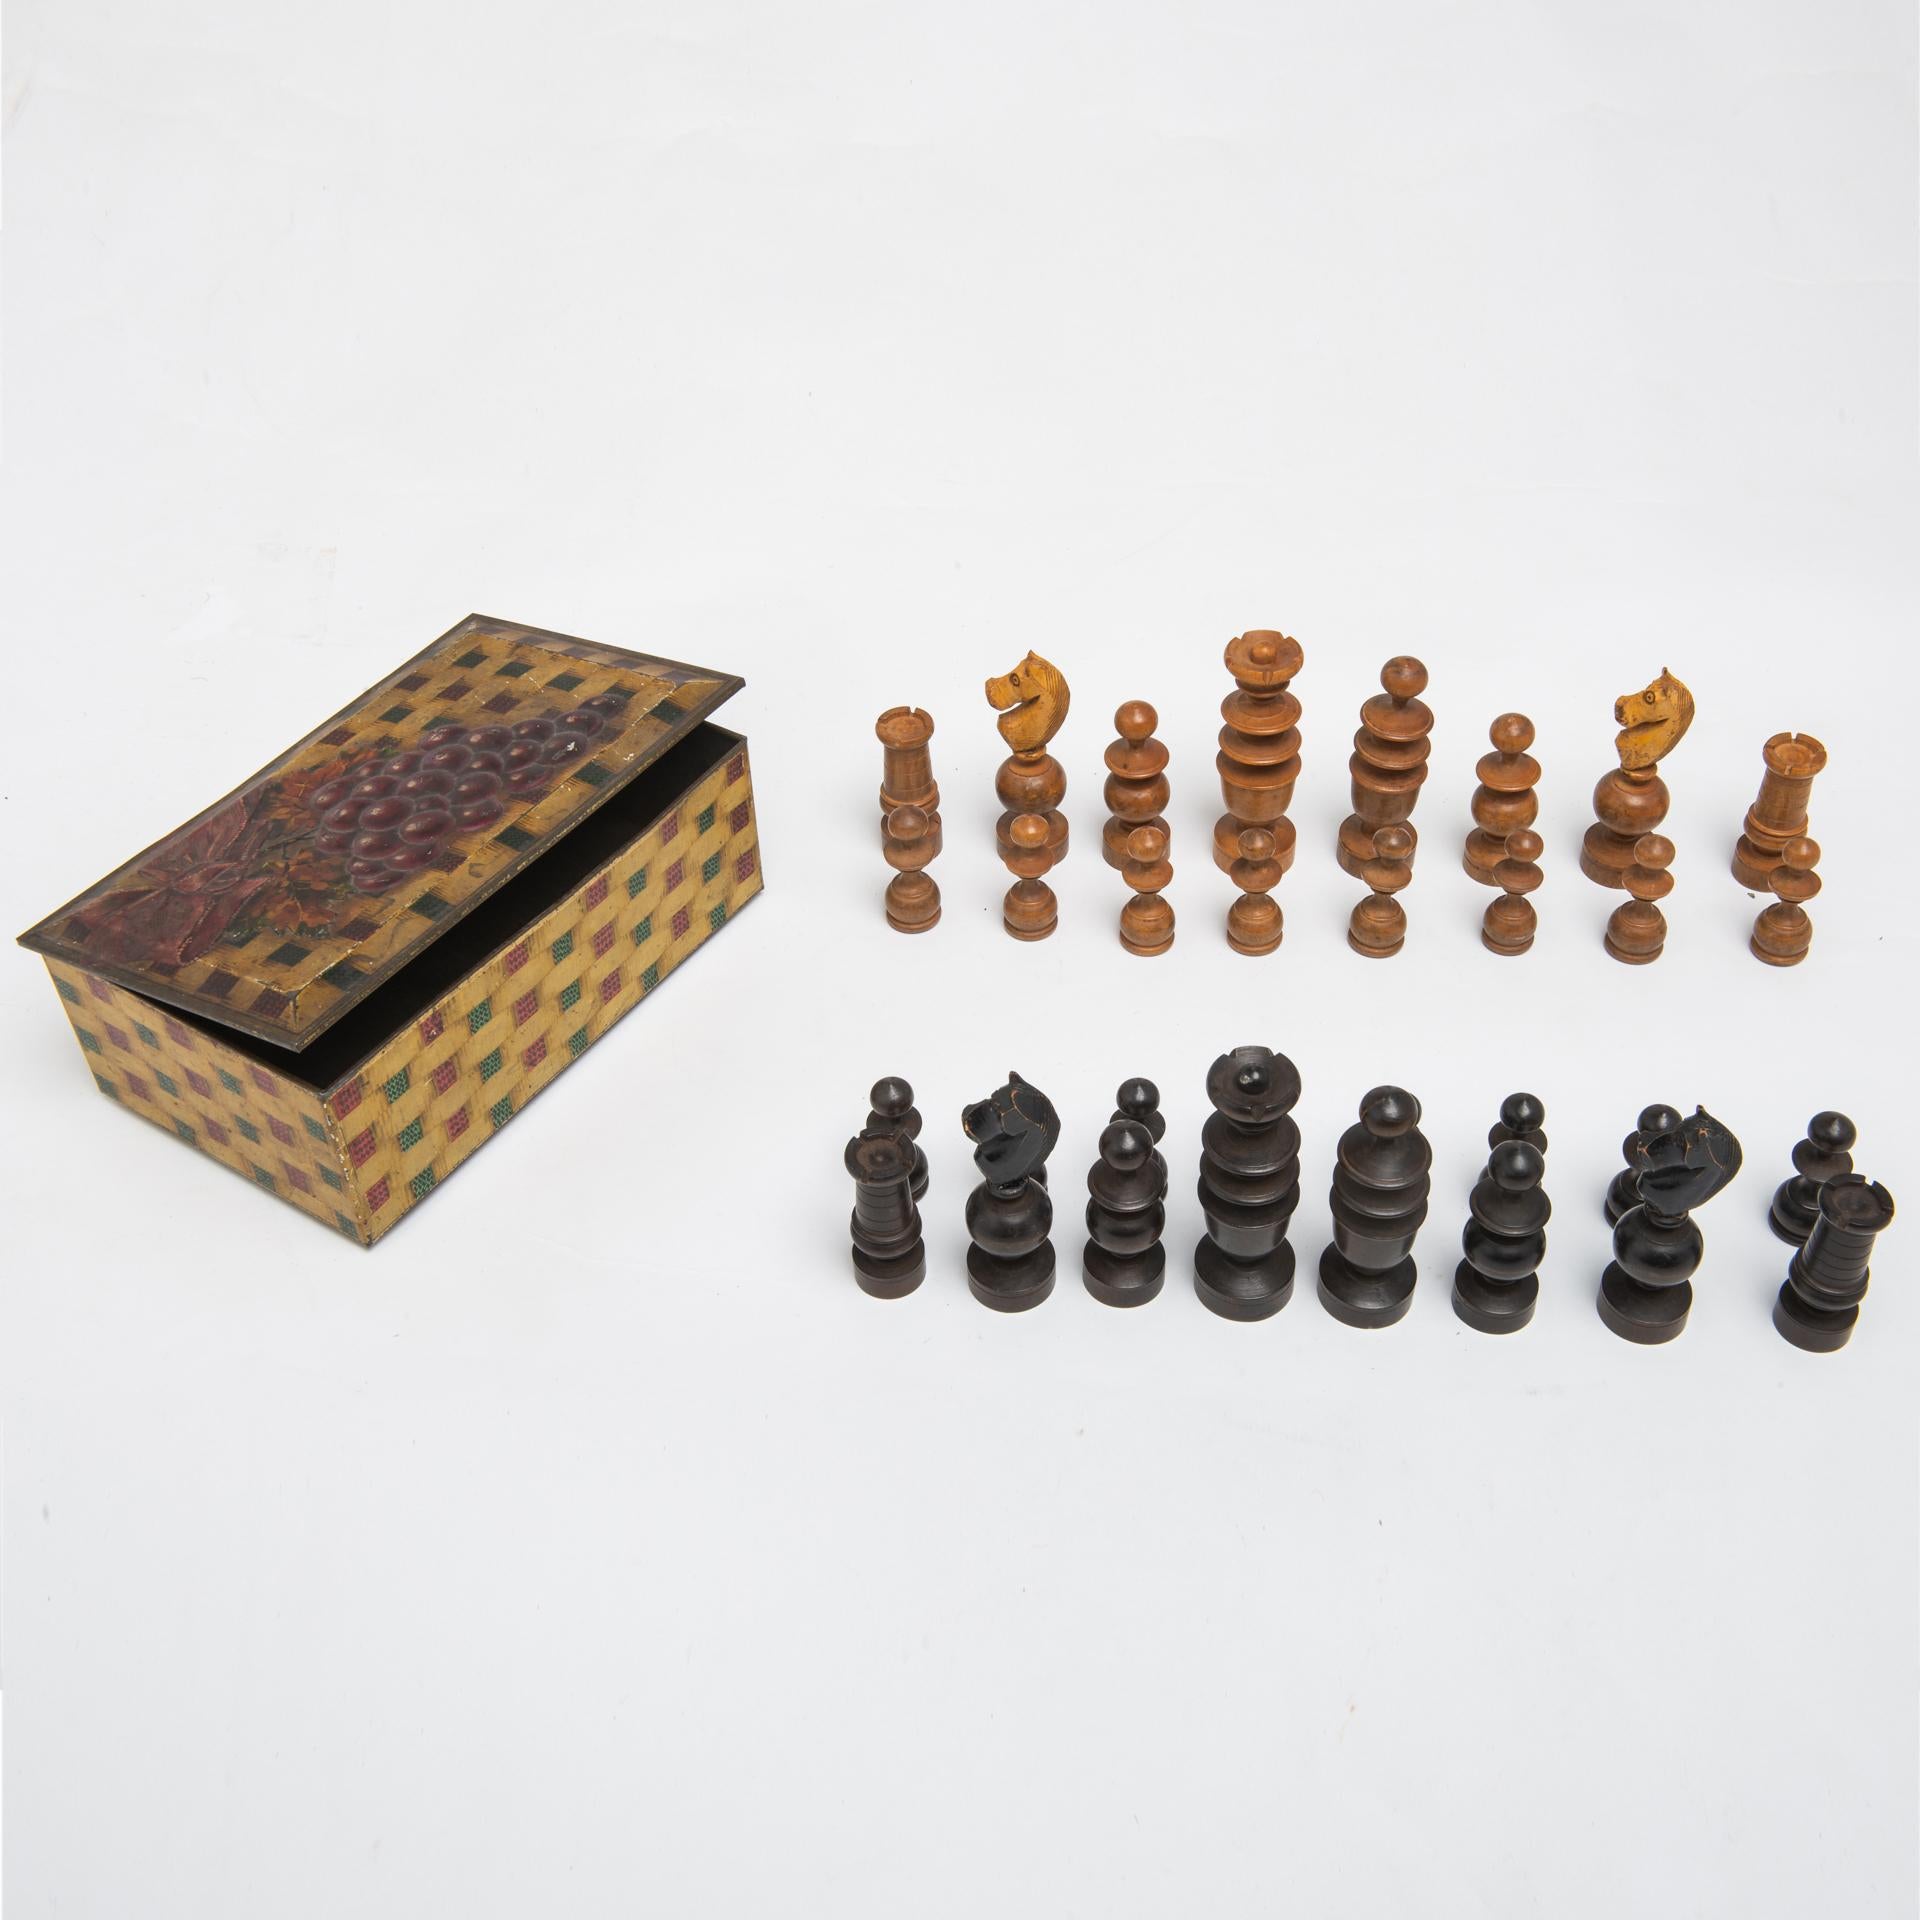 English old wooden chess: its size is already marked , the king is cm. 9,5 high.
 The metal box with grape is English and is a gift for You.
I hope You have a game table with chessboard (like I have at home), so You can use it with these beautiful